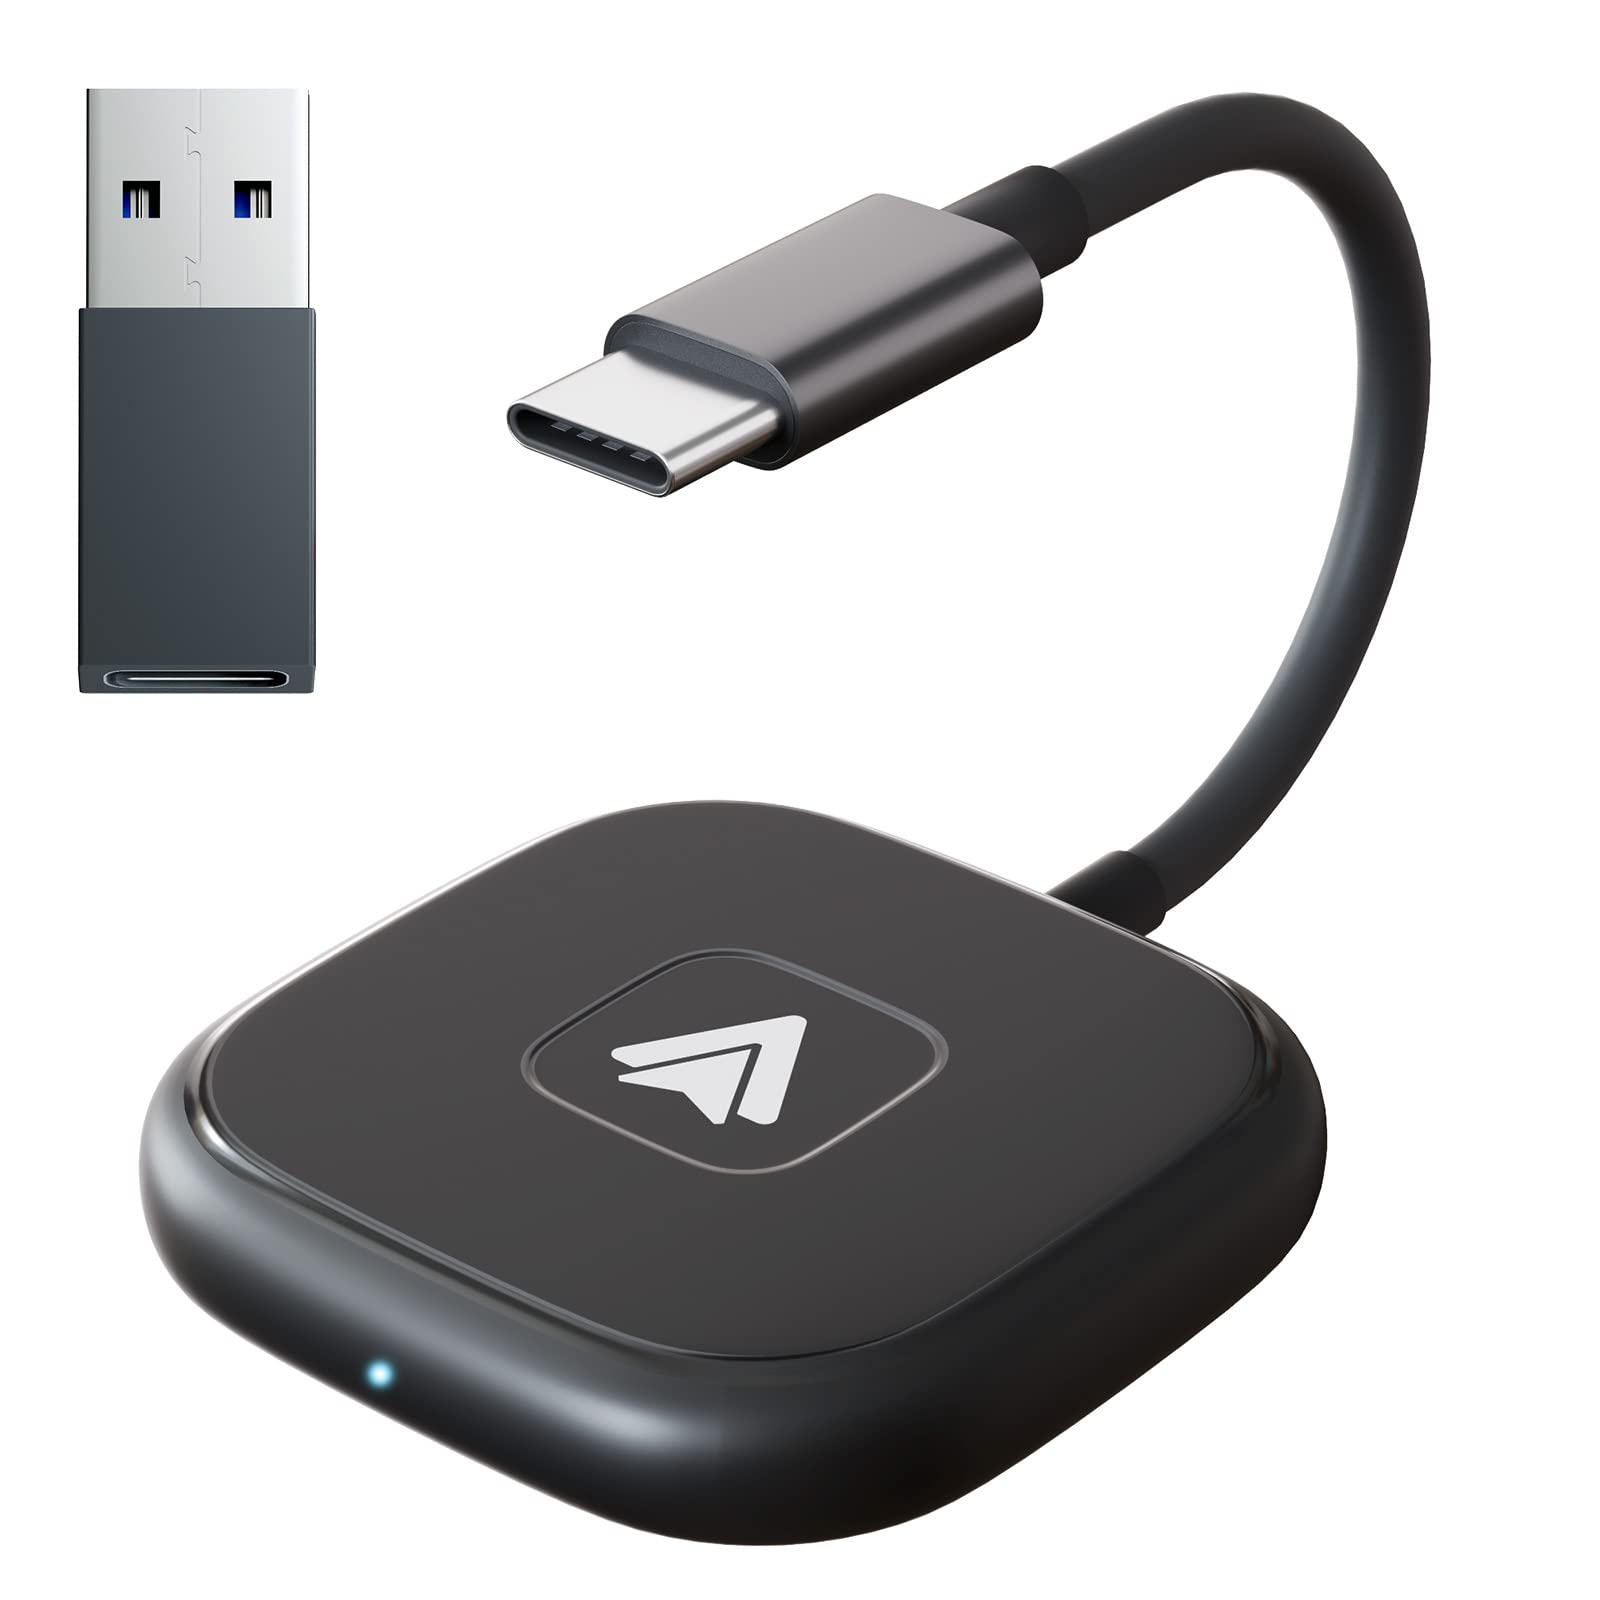 Android Autoワイヤレス アダプター アンドロイド オート Android 11以降システム搭載専用 Wireless Android Auto adapter 無線 カーナビ android auto Samsung Galaxy/Google Phones/Oneplus Phones/Android11以降のスマホに適用